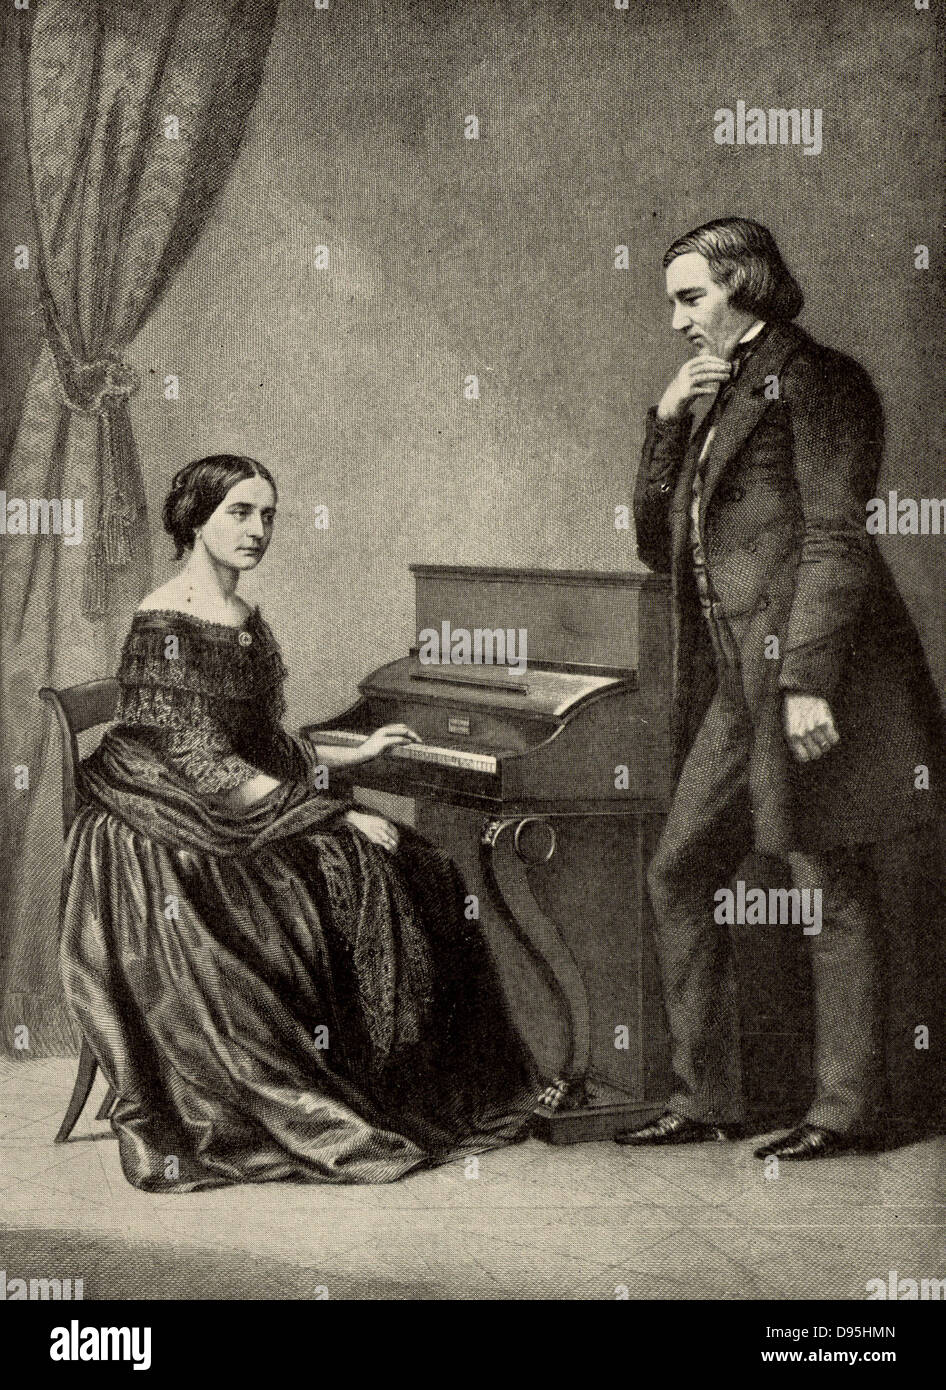 Robert Schumann (1810-1856) German Romantic composer with his wife Clara (born Wieck). From a photograph. Halftone. Stock Photo